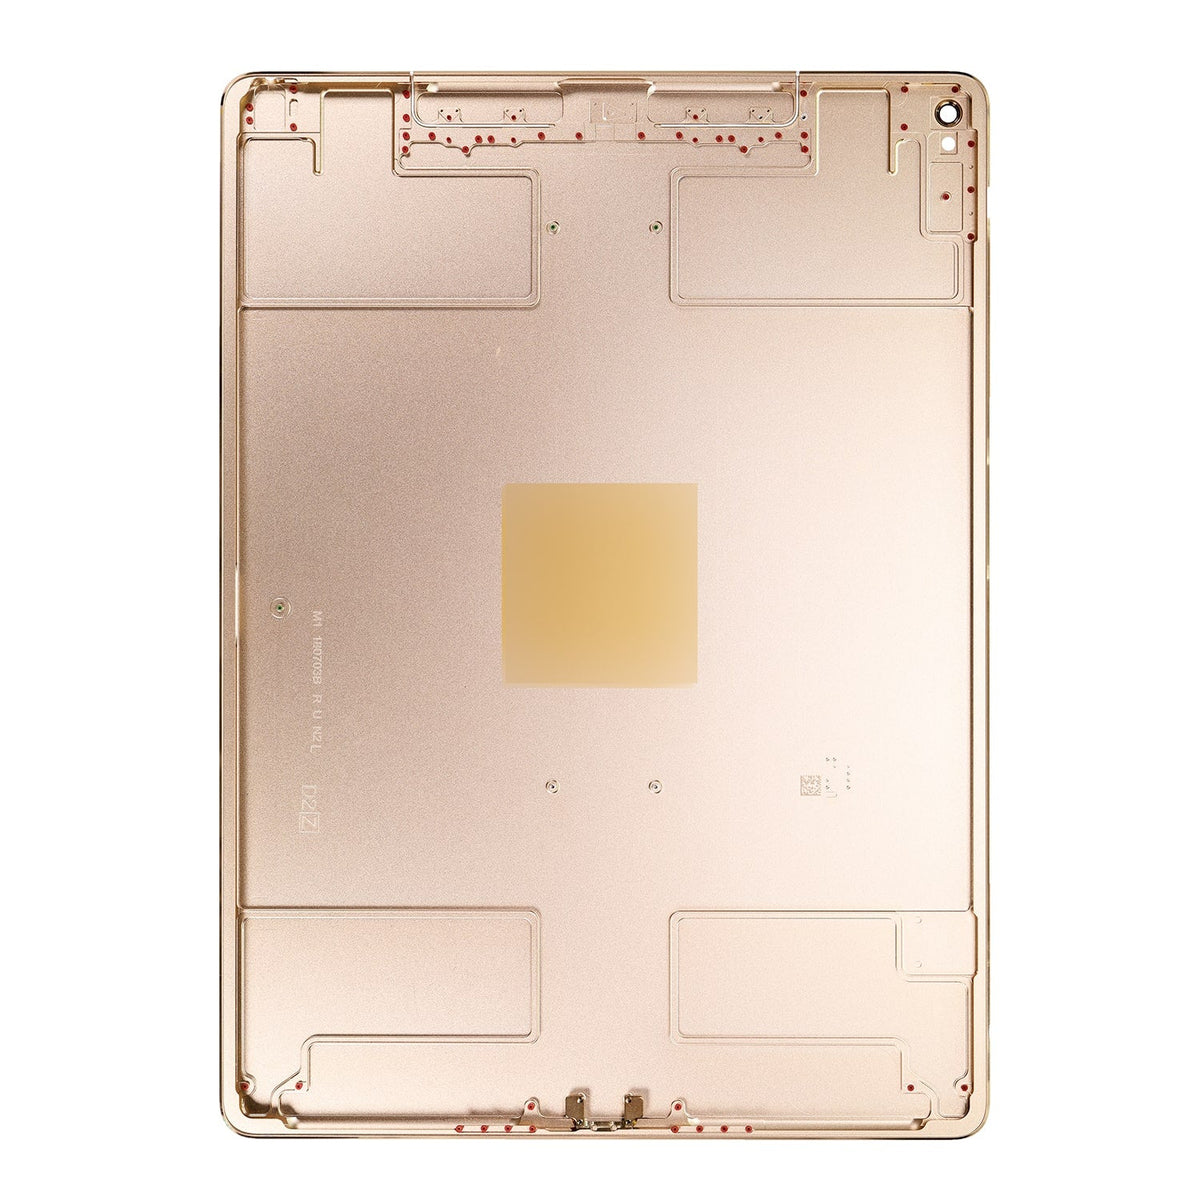 BACK COVER WIFI + CELLULAR VERSION FOR IPAD PRO 12.9 2ND GEN- GOLD